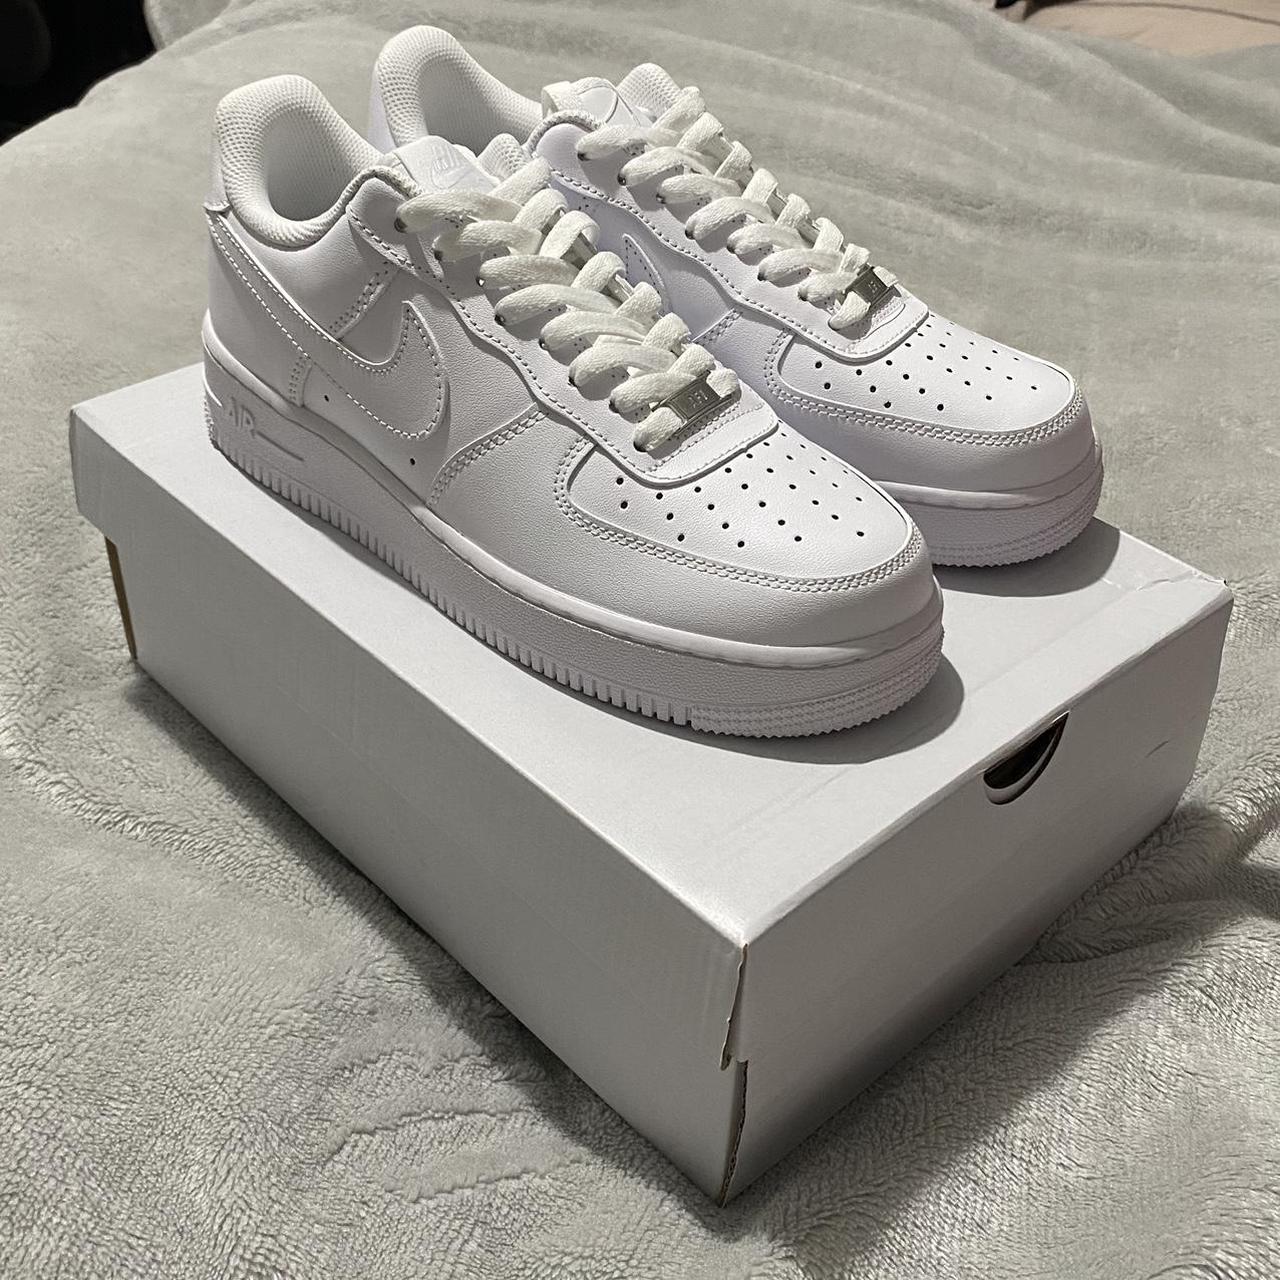 Brand New AirForce One White #airforce #airforce1... - Depop